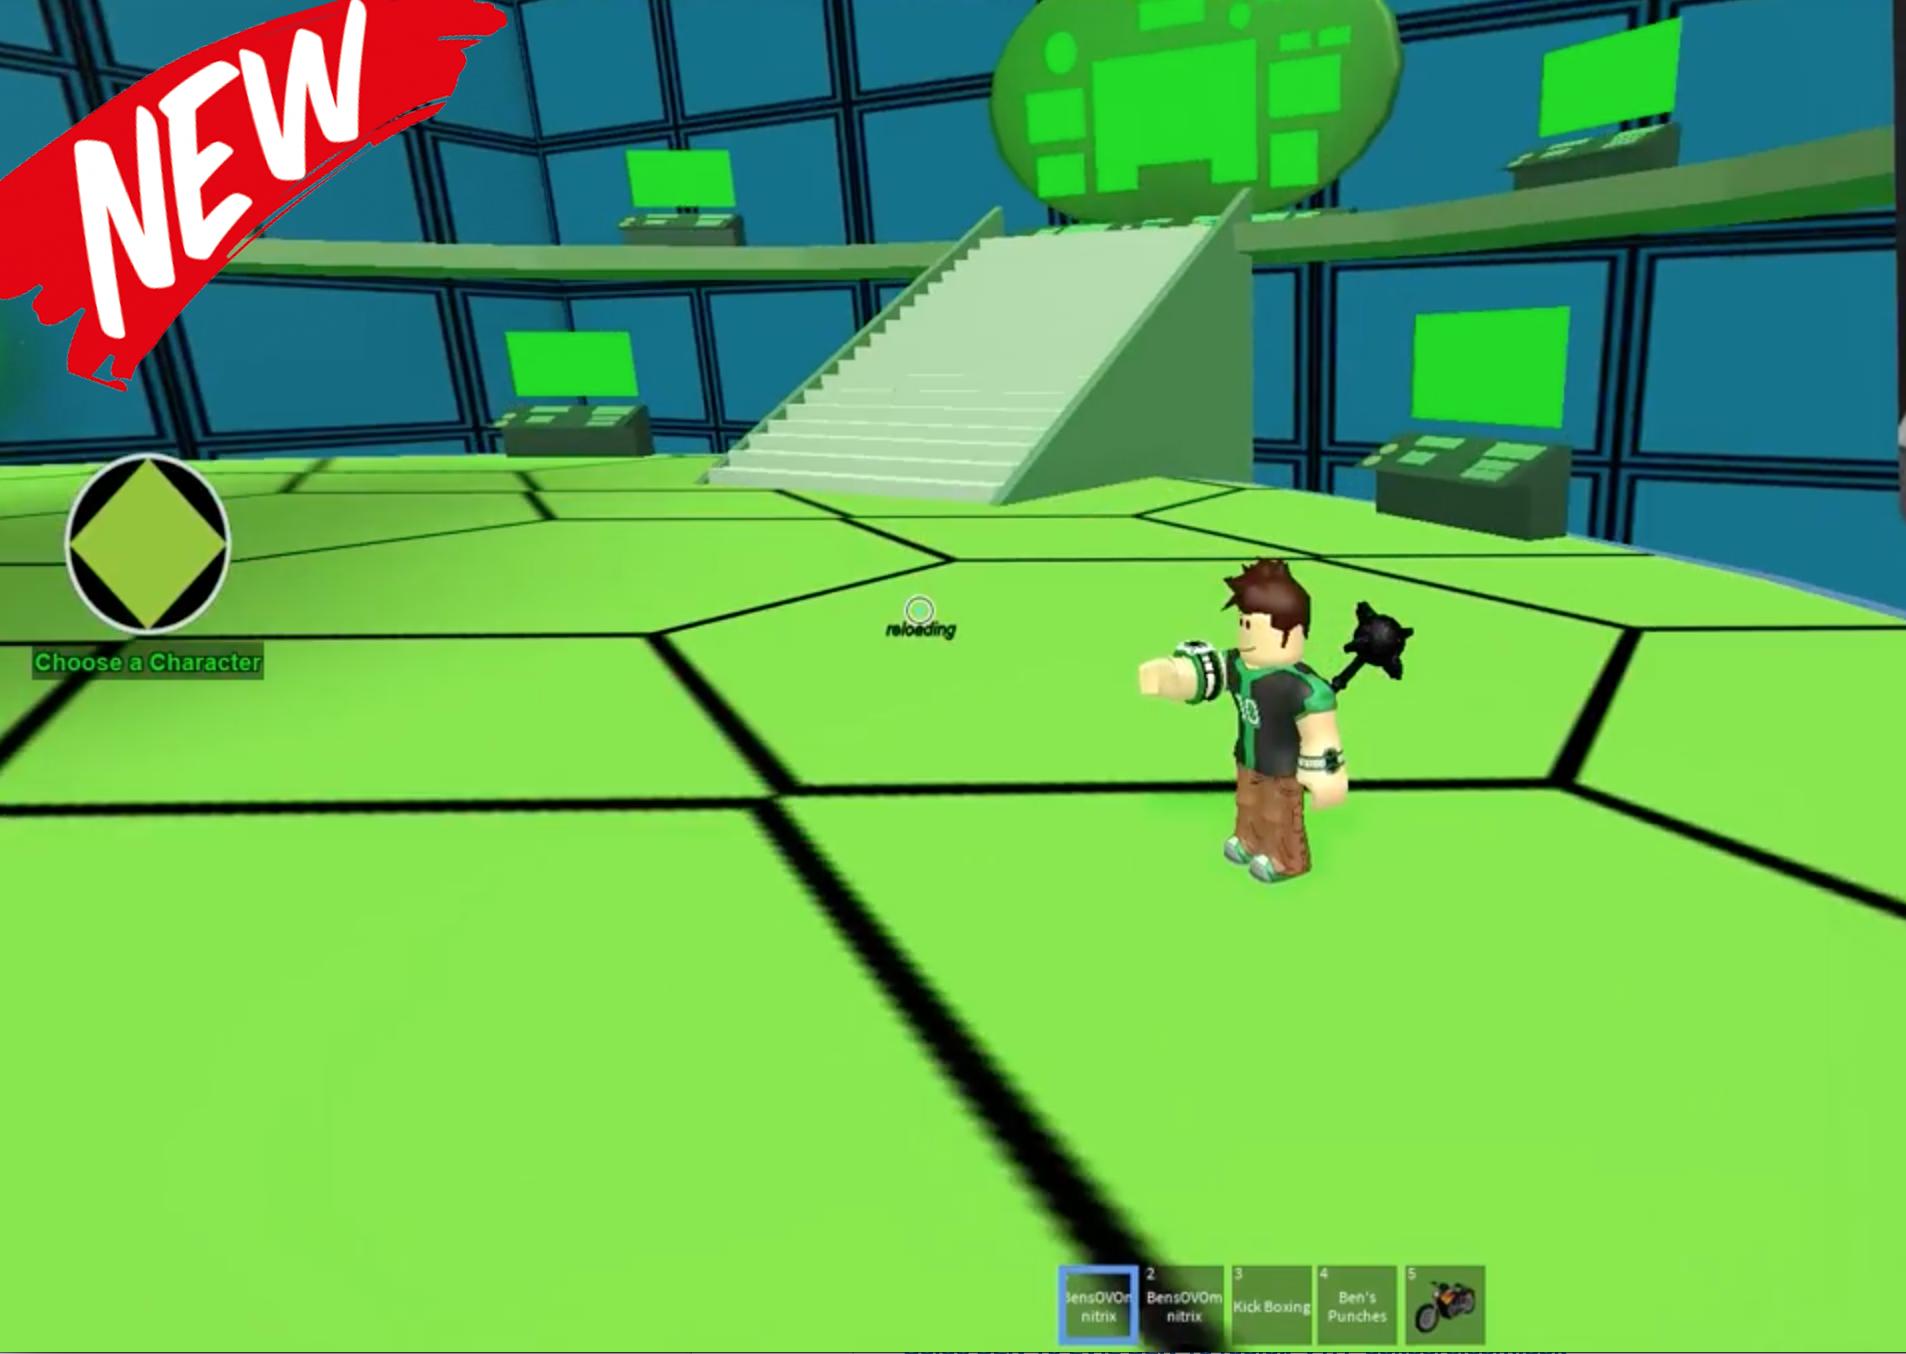 Guide For Ben 10 Evil Ben 10 Roblox Pro For Android Apk Download - guide for ben 10 evil ben 10 roblox pro on windows pc